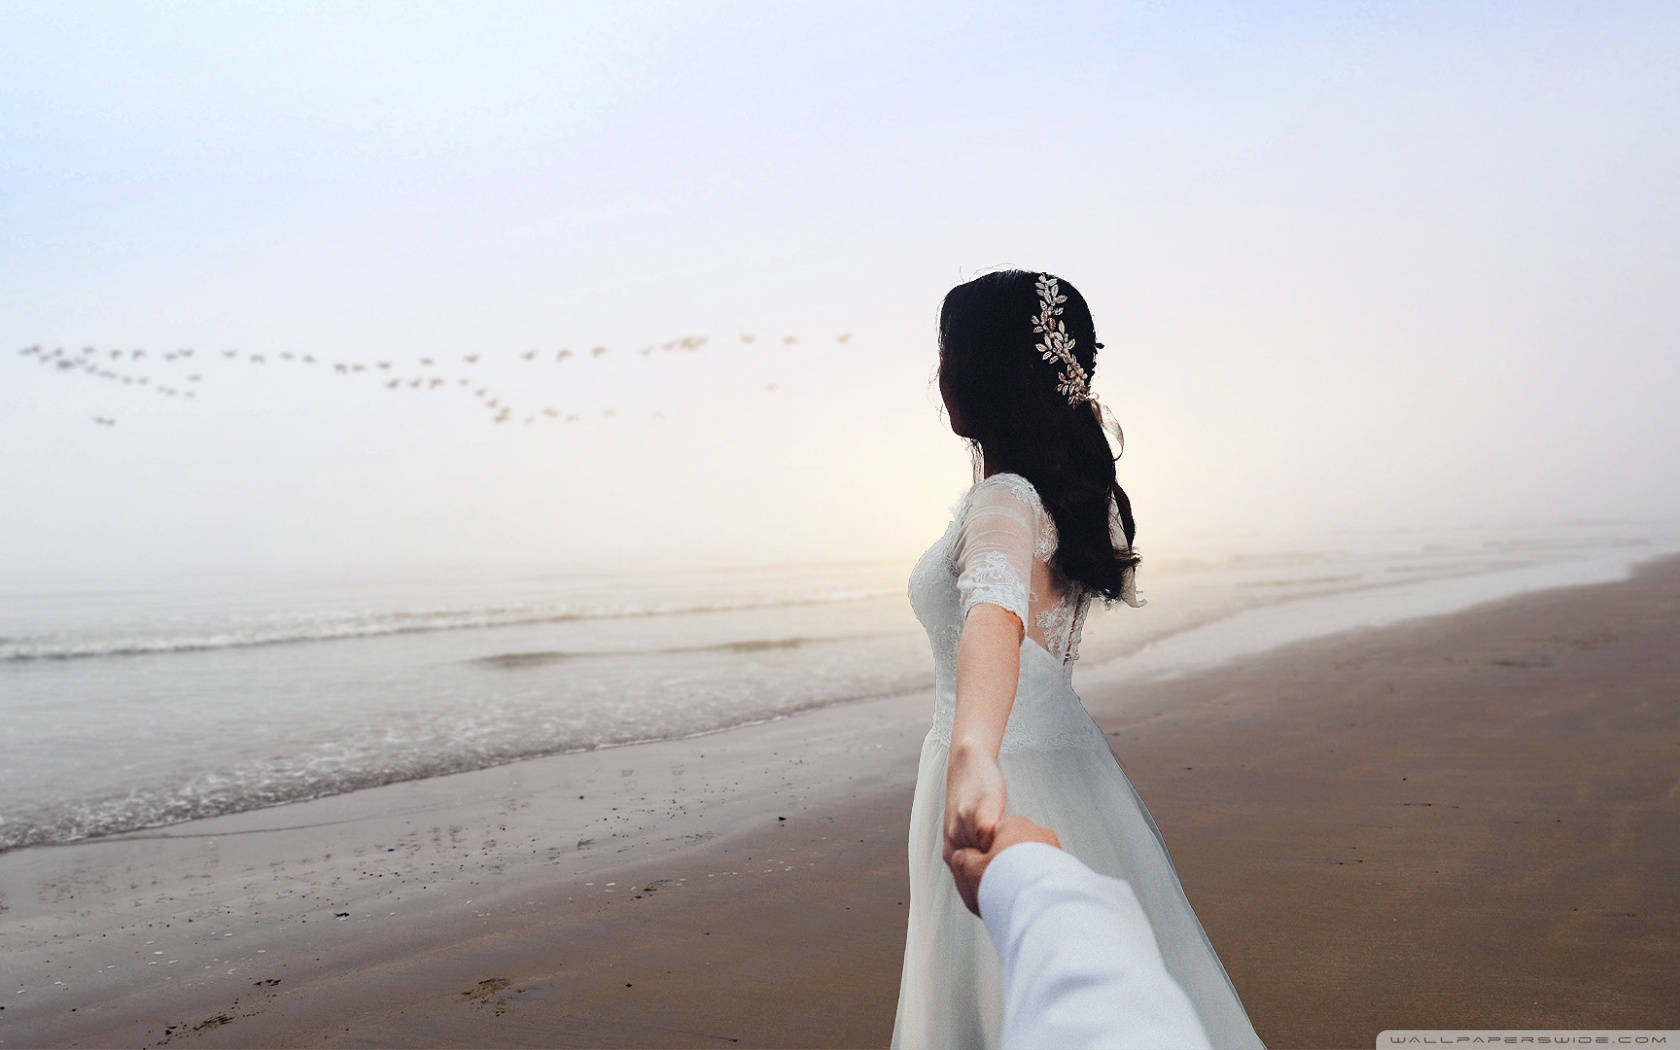 Holding Hands By The Beach In Wedding Gown Wallpaper